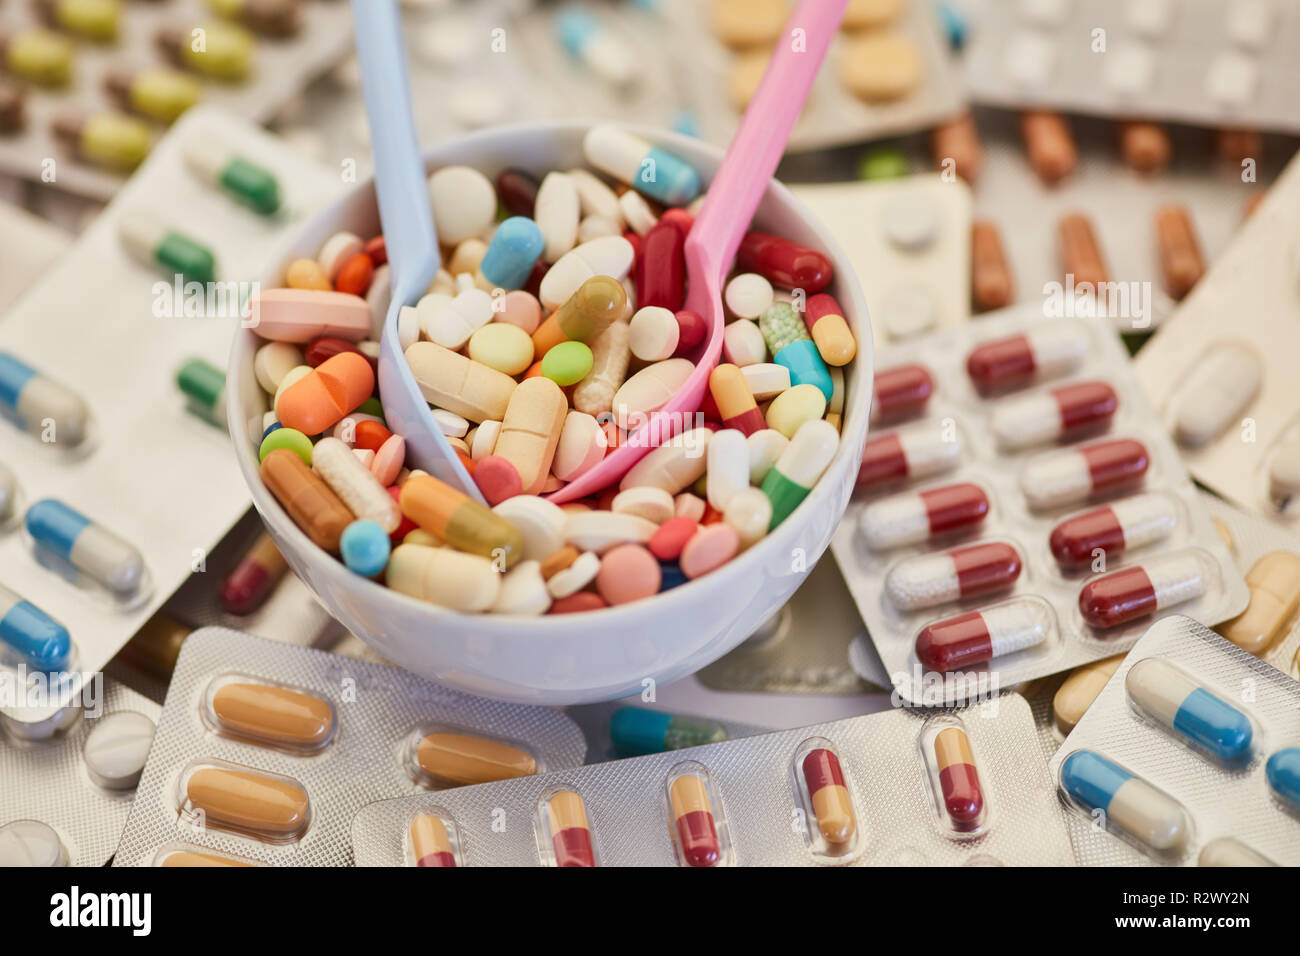 Drug abuse concept with many tablets and pills in a bowl Stock Photo